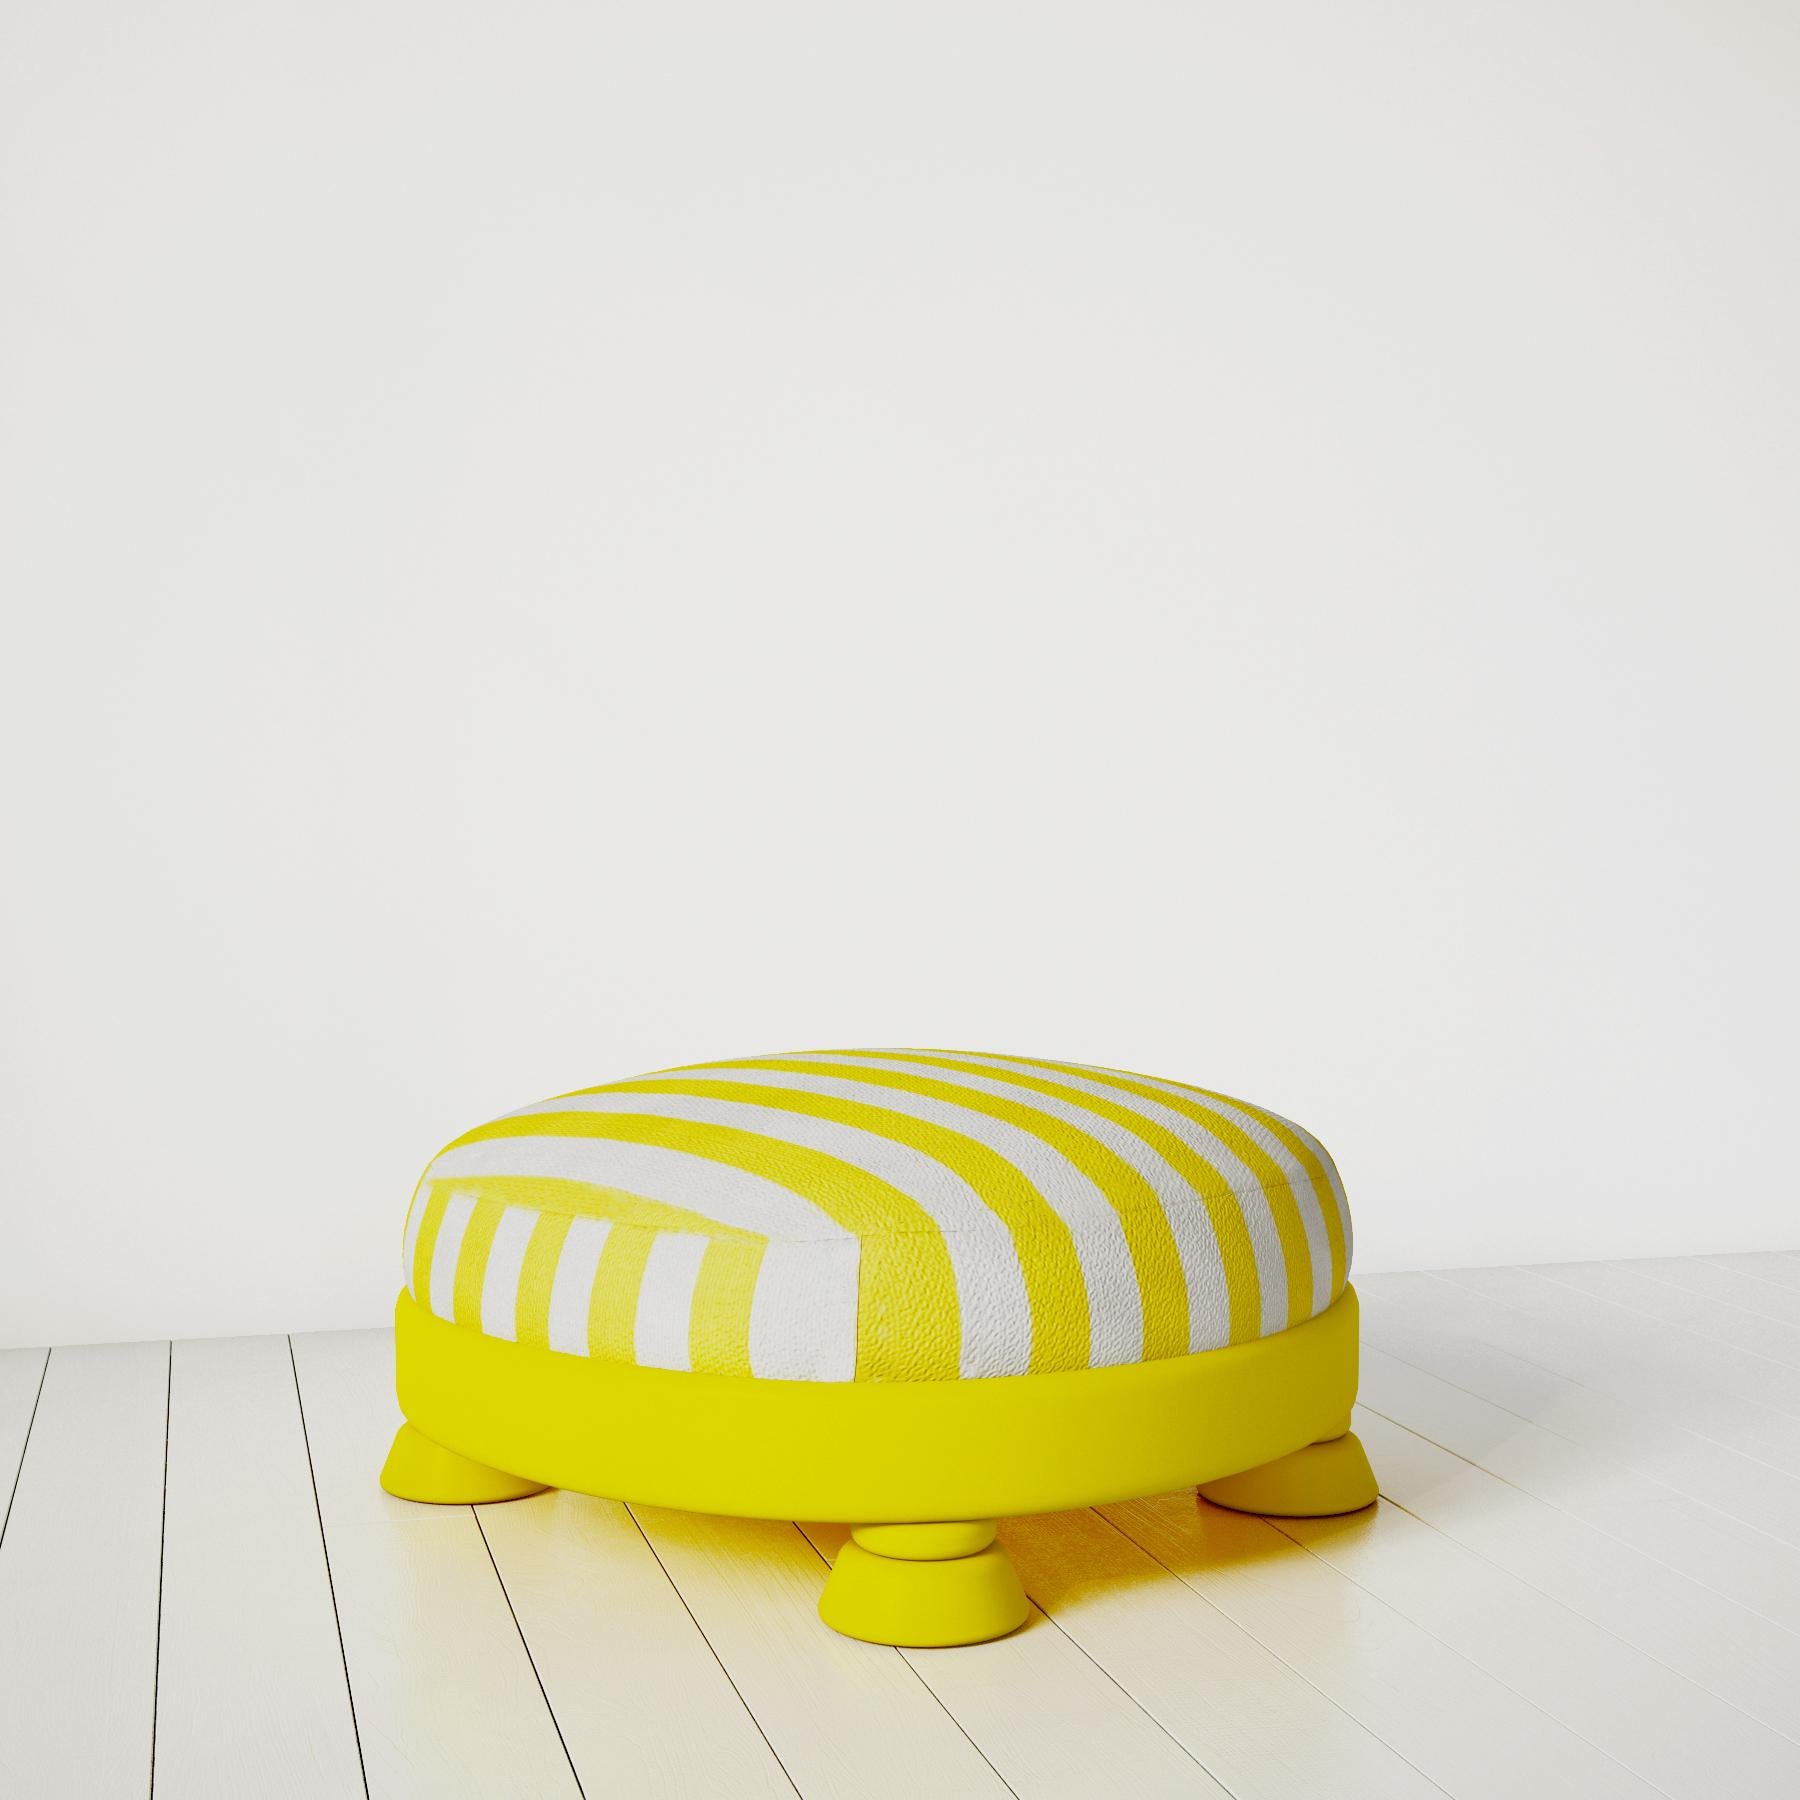 Yellow Mellow Pouf
Yellow Mellow Pouf, a fun and colorful addition to your living spaces. Its vibrant color adds energy, while the soft details of its form highlight a neotenik style.

Production Method and Material
With its striped fabric that can